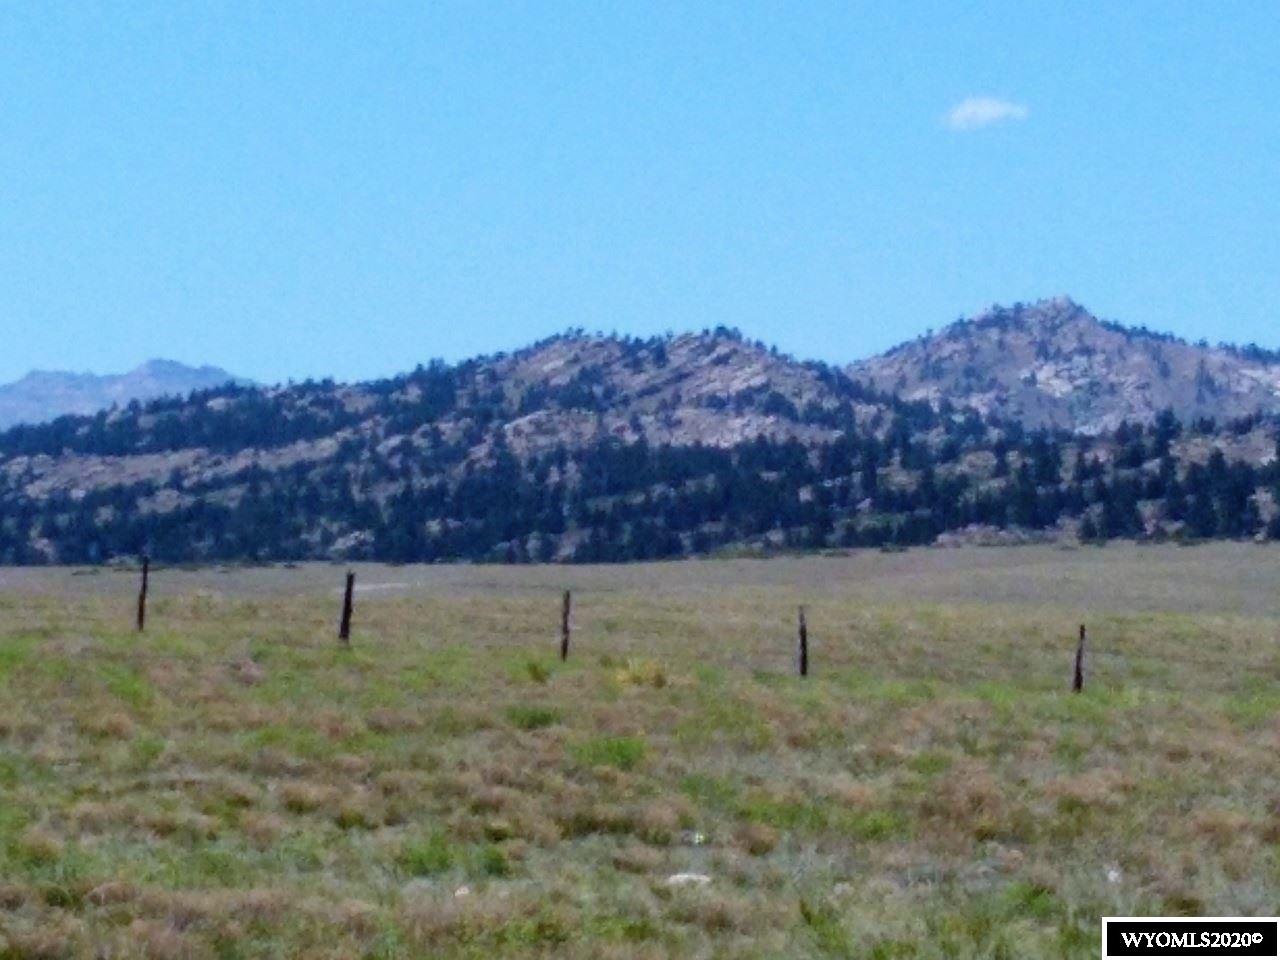 Own a piece of the true west!  Over 1300 acres with several water sources, easy access to county roads, and breathtaking views of the Laramie Range.  Hunter’s take a look at the native species that call this area home.  Fenced and ready for a great getaway spot.  Agent owned. Call Jeannie Mitchell at 307*331*0505